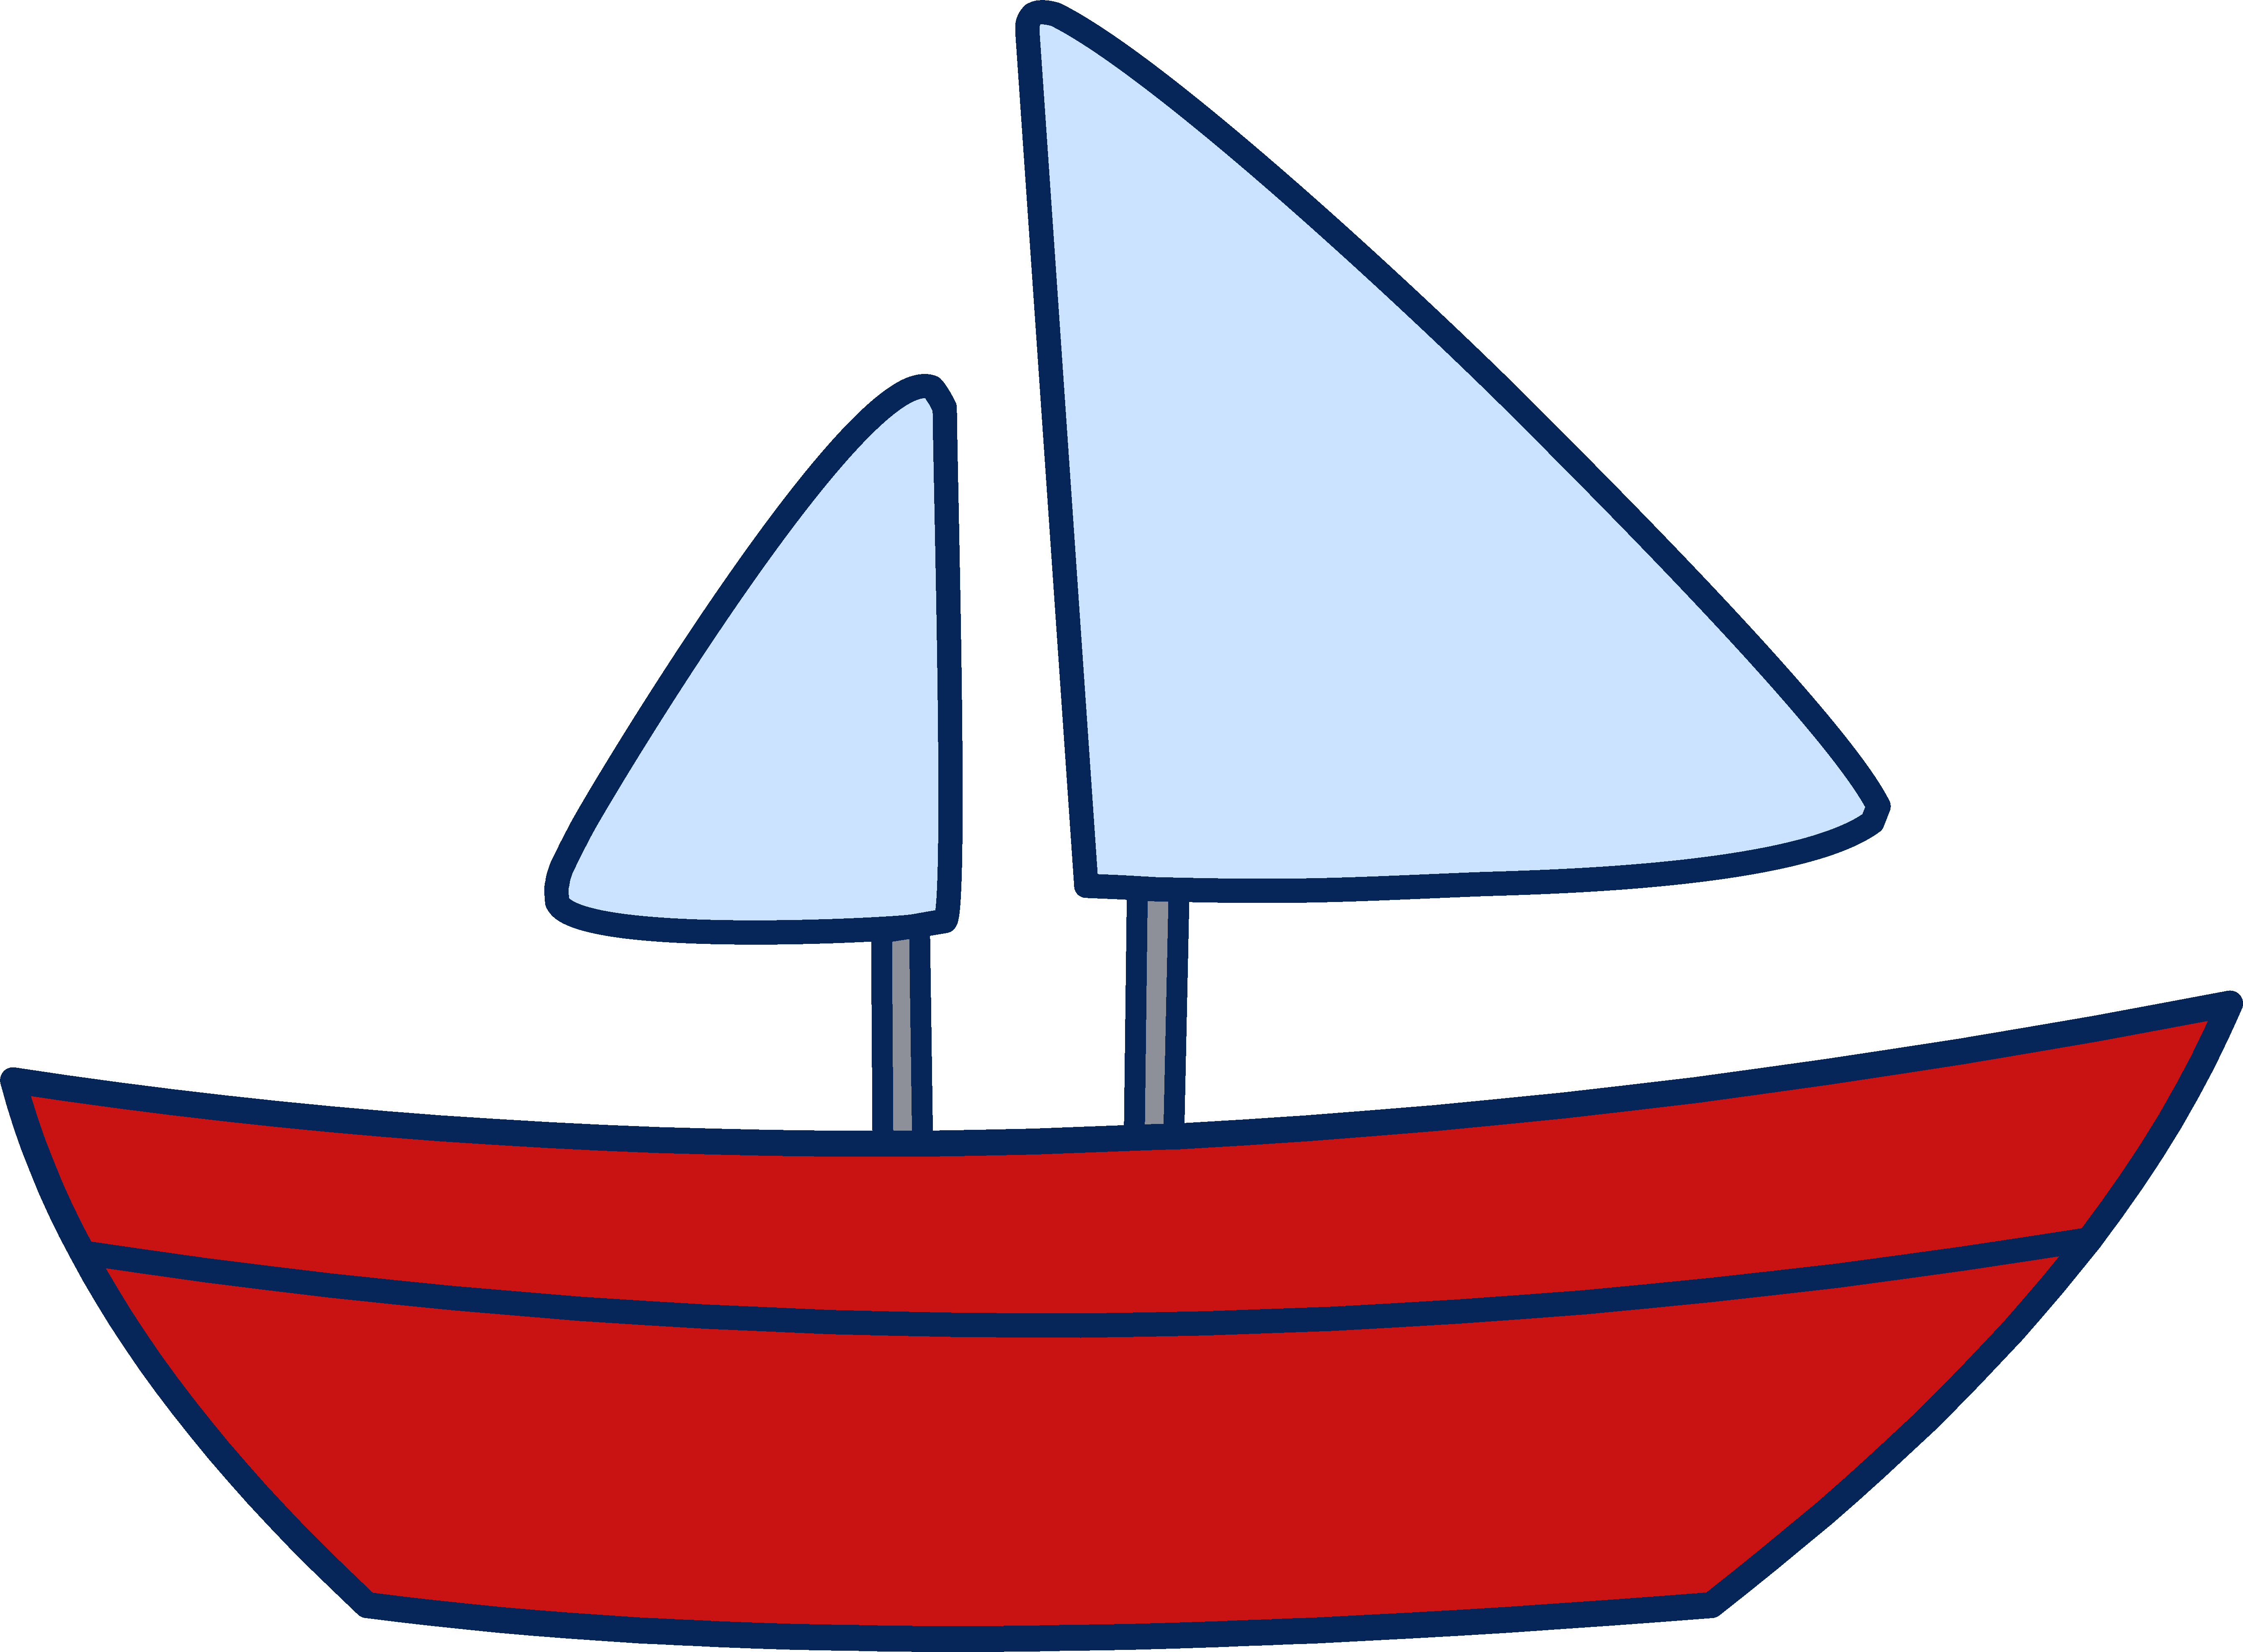 Sailboat Clip Art Simple | Clipart library - Free Clipart Images